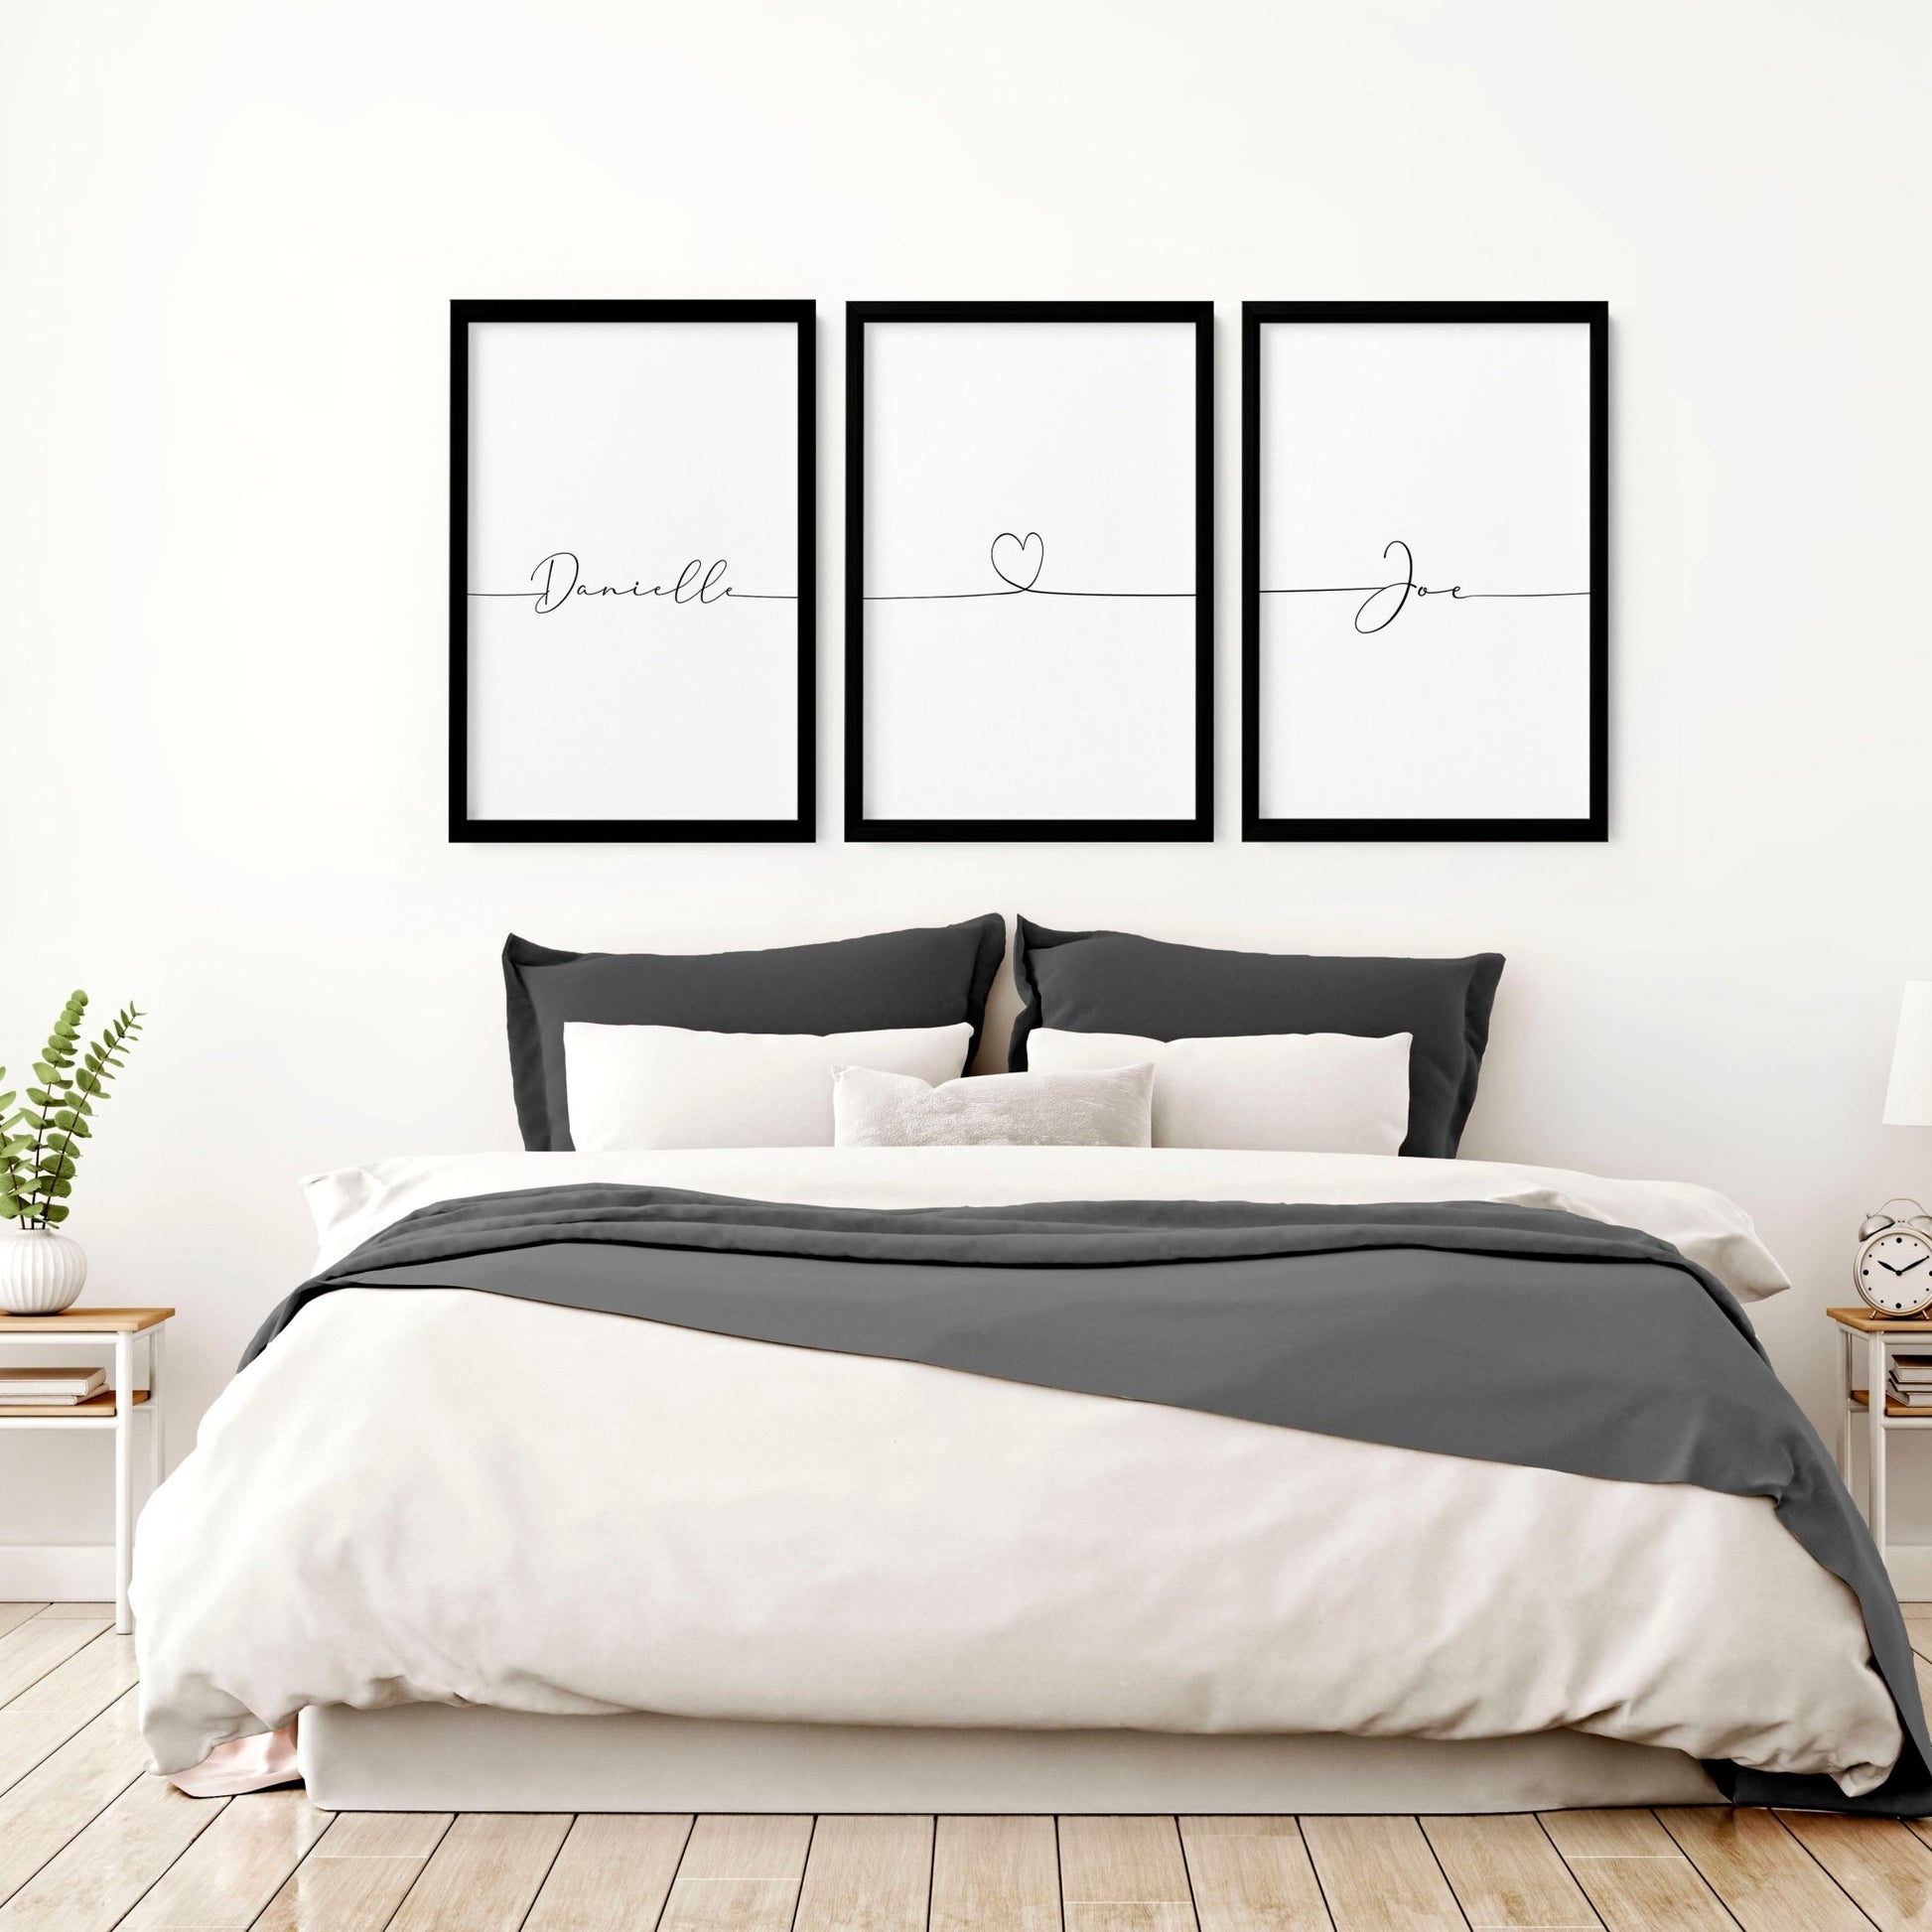 Customized valentines gift | set of 3 wall art prints for Bedroom - About Wall Art